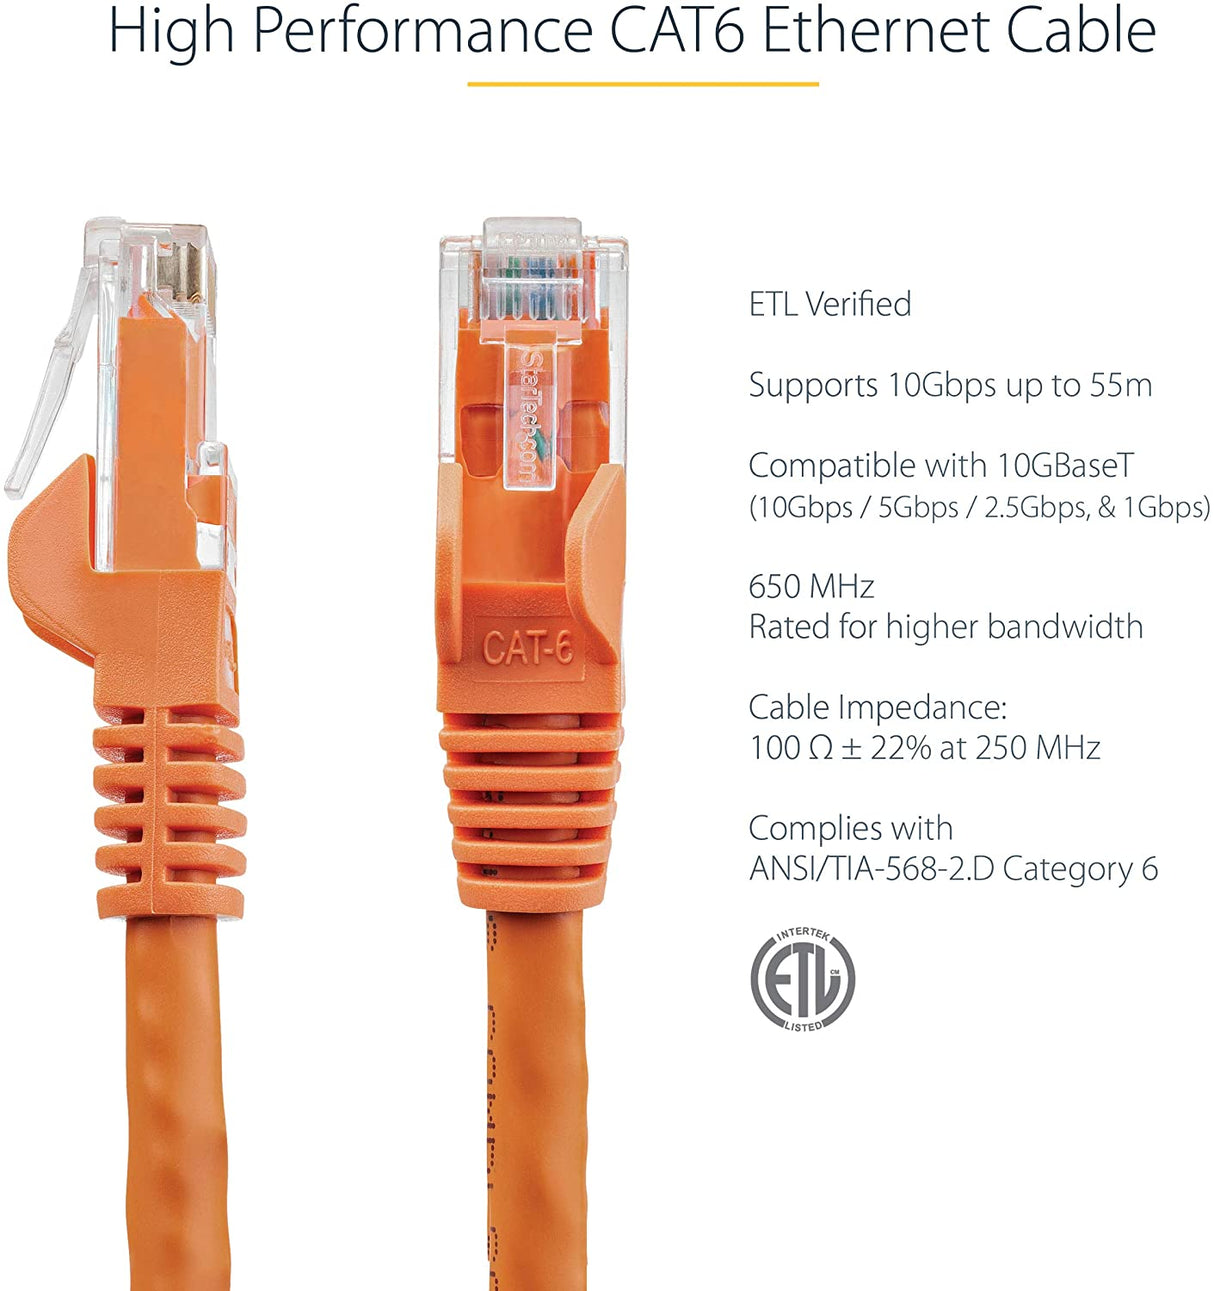 StarTech.com 6in CAT6 Ethernet Cable - Orange CAT 6 Gigabit Ethernet Wire -650MHz 100W PoE++ RJ45 UTP Category 6 Network/Patch Cord Snagless Fluke Tested UL/TIA Certified (N6PATCH6INOR) Orange 0.5 ft 1 Pack